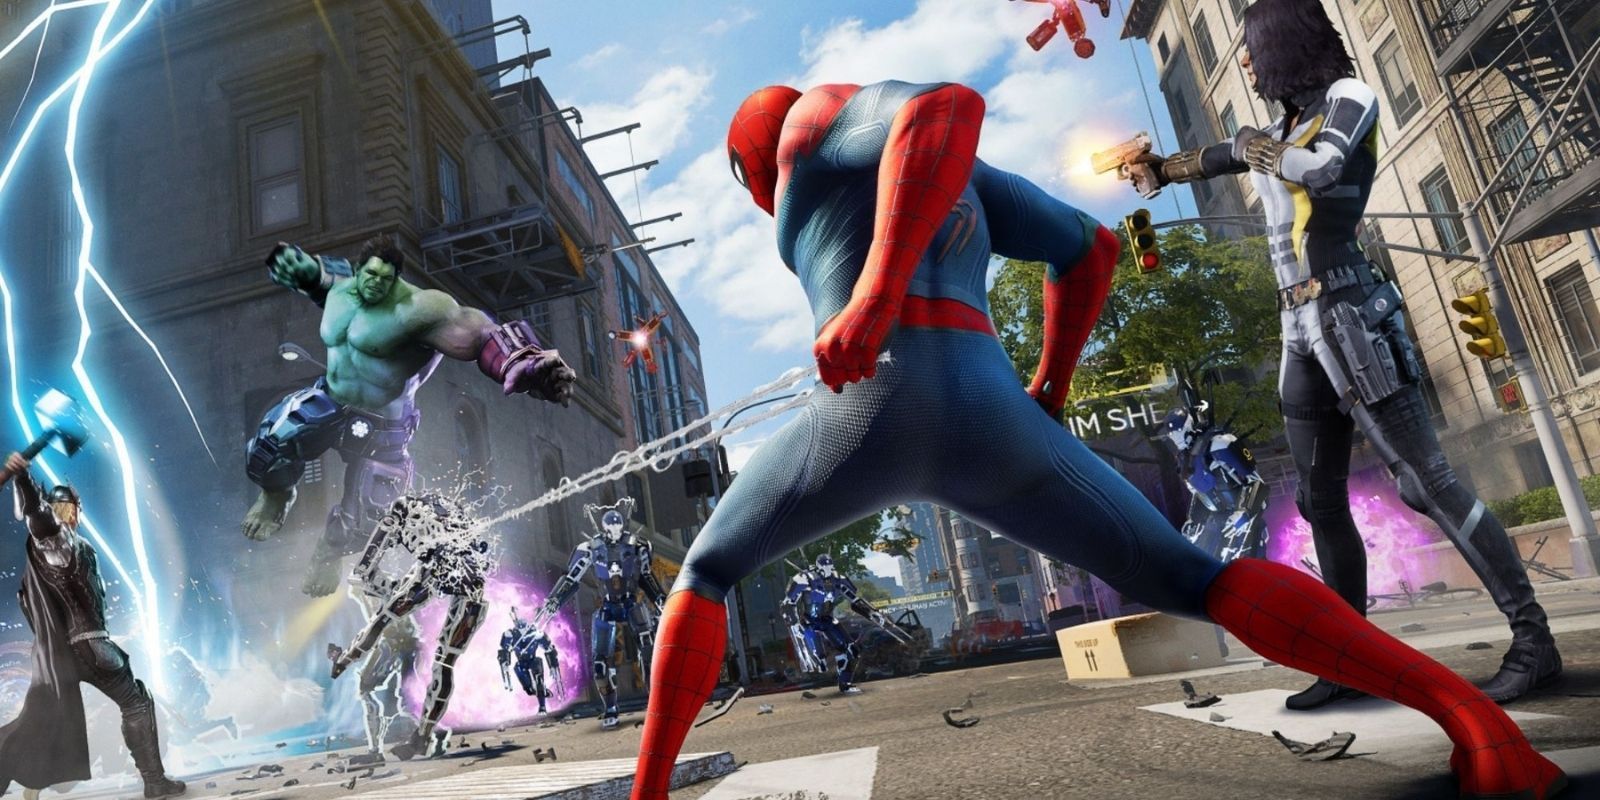 Spider-Man webs up a synthoid alongside Black Widow, Hulk and Thor in Marvel's Avengers